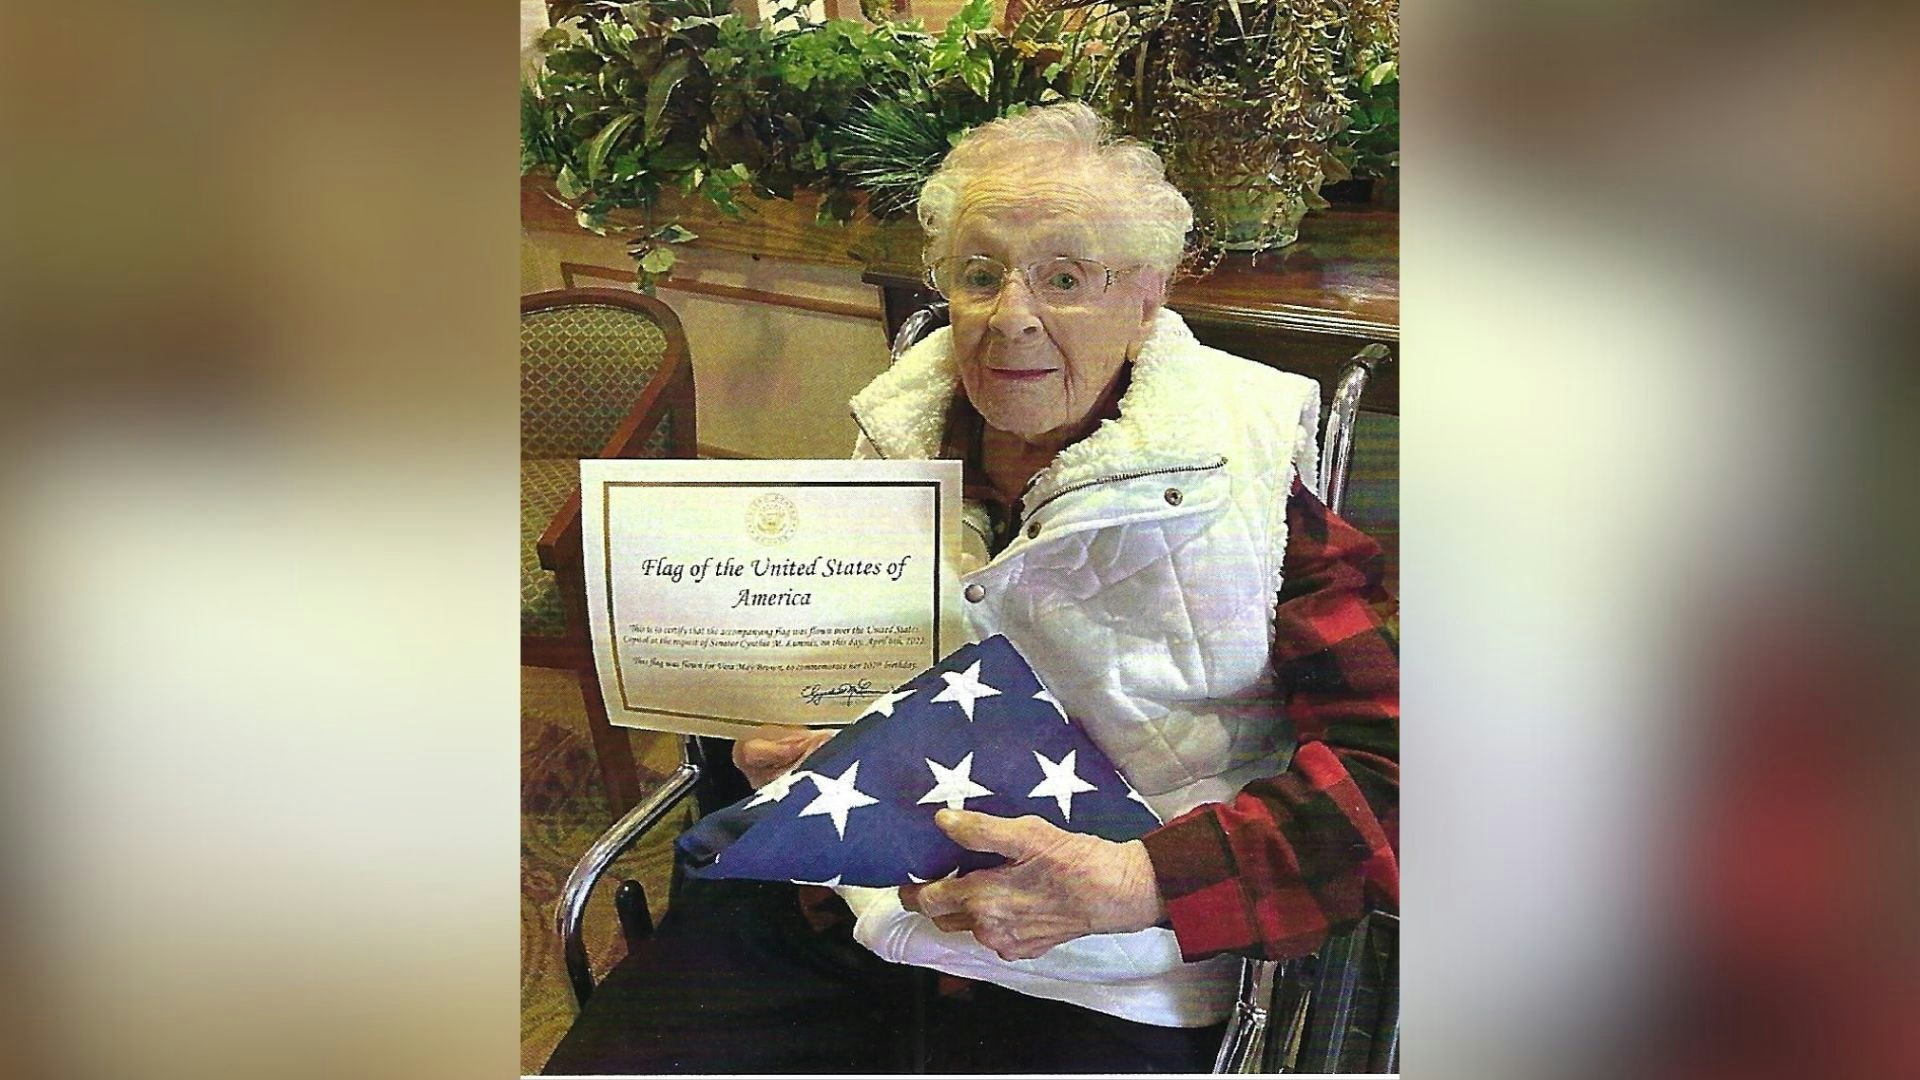 Vera Brown of Gillette, who celebrated her 108th birthday last week, poses with an American flag that flew over the White House on her 107th birthday last year.